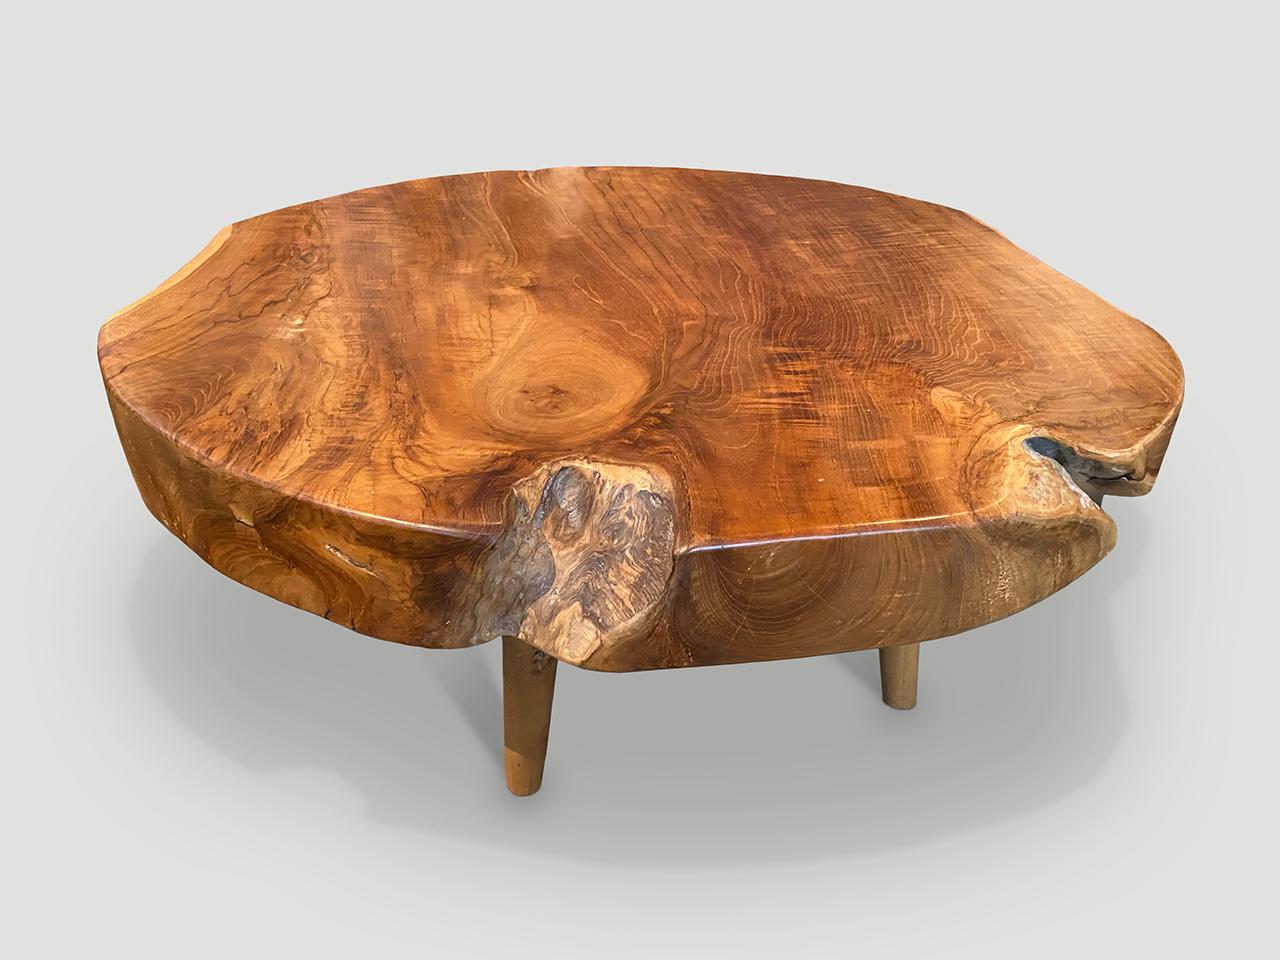 Impressive three and a half inch reclaimed teak wood single slab coffee table. Floating on mid century style cone legs and finished with a natural oil revealing the beautiful wood grain. Organic with a twist.

Own an Andrianna Shamaris